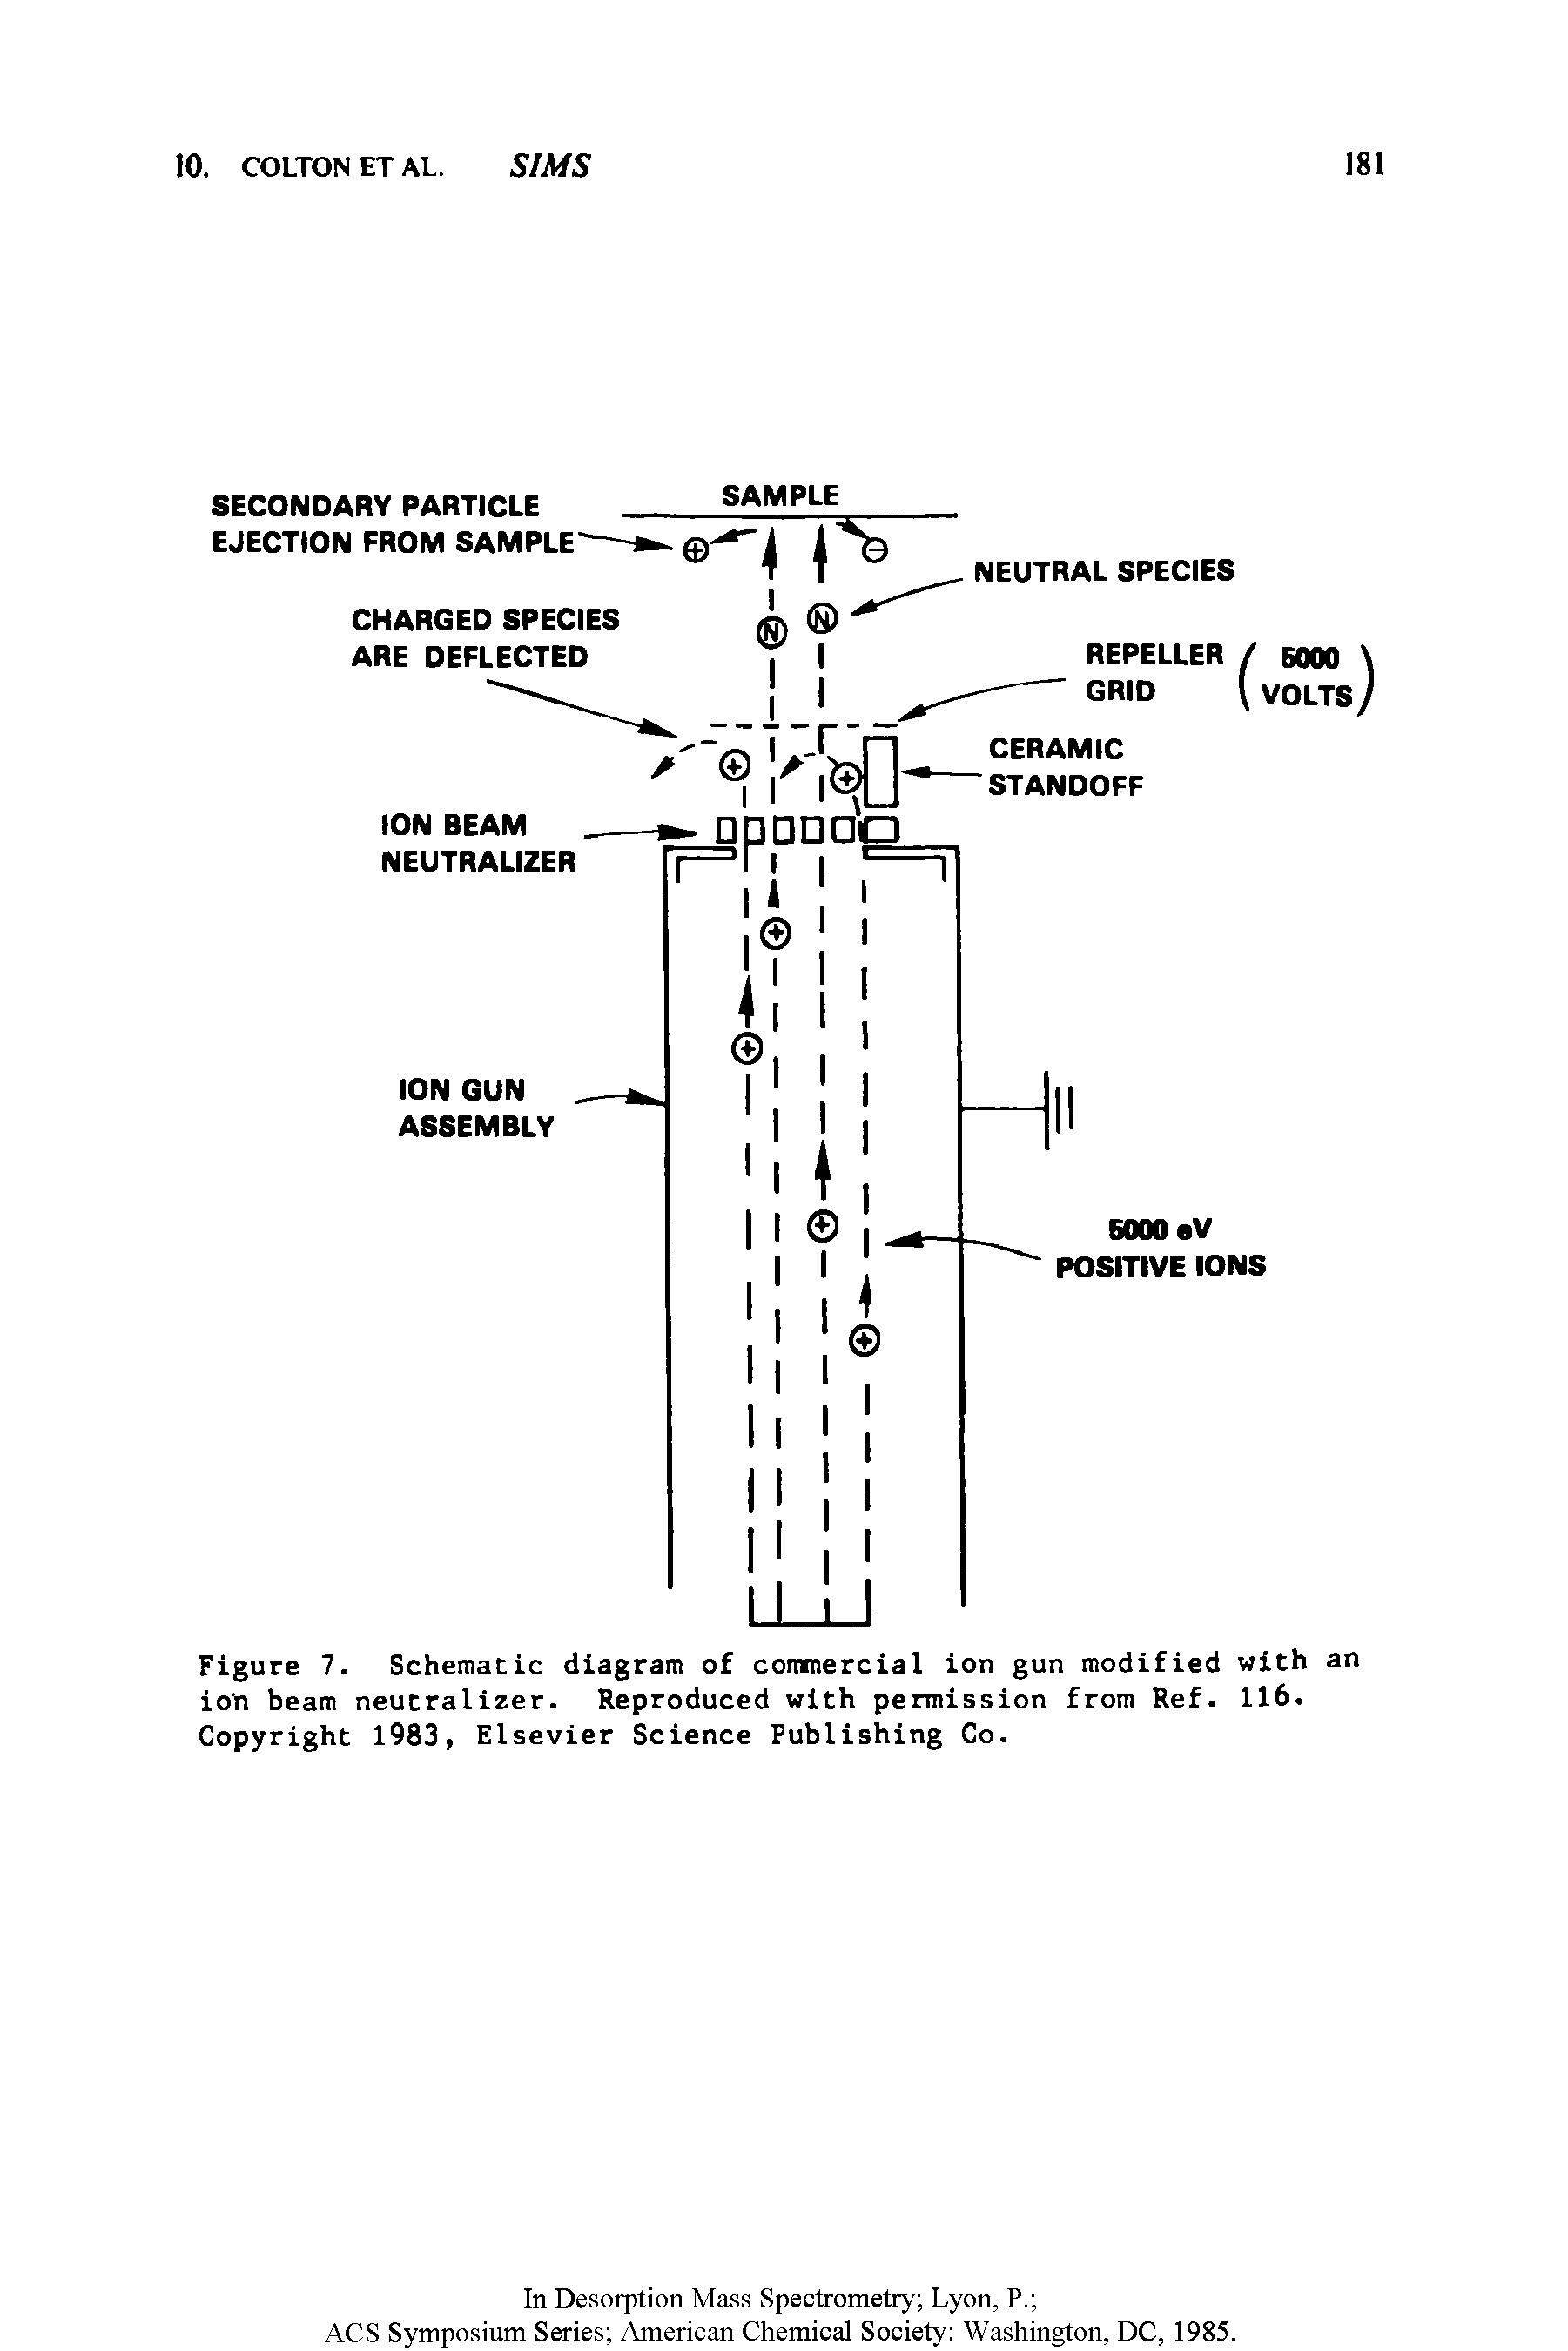 Figure 7. Schematic diagram of commercial ion gun modified with an ion beam neutralizer. Reproduced with permission from Ref. 116. Copyright 1983, Elsevier Science Publishing Co.